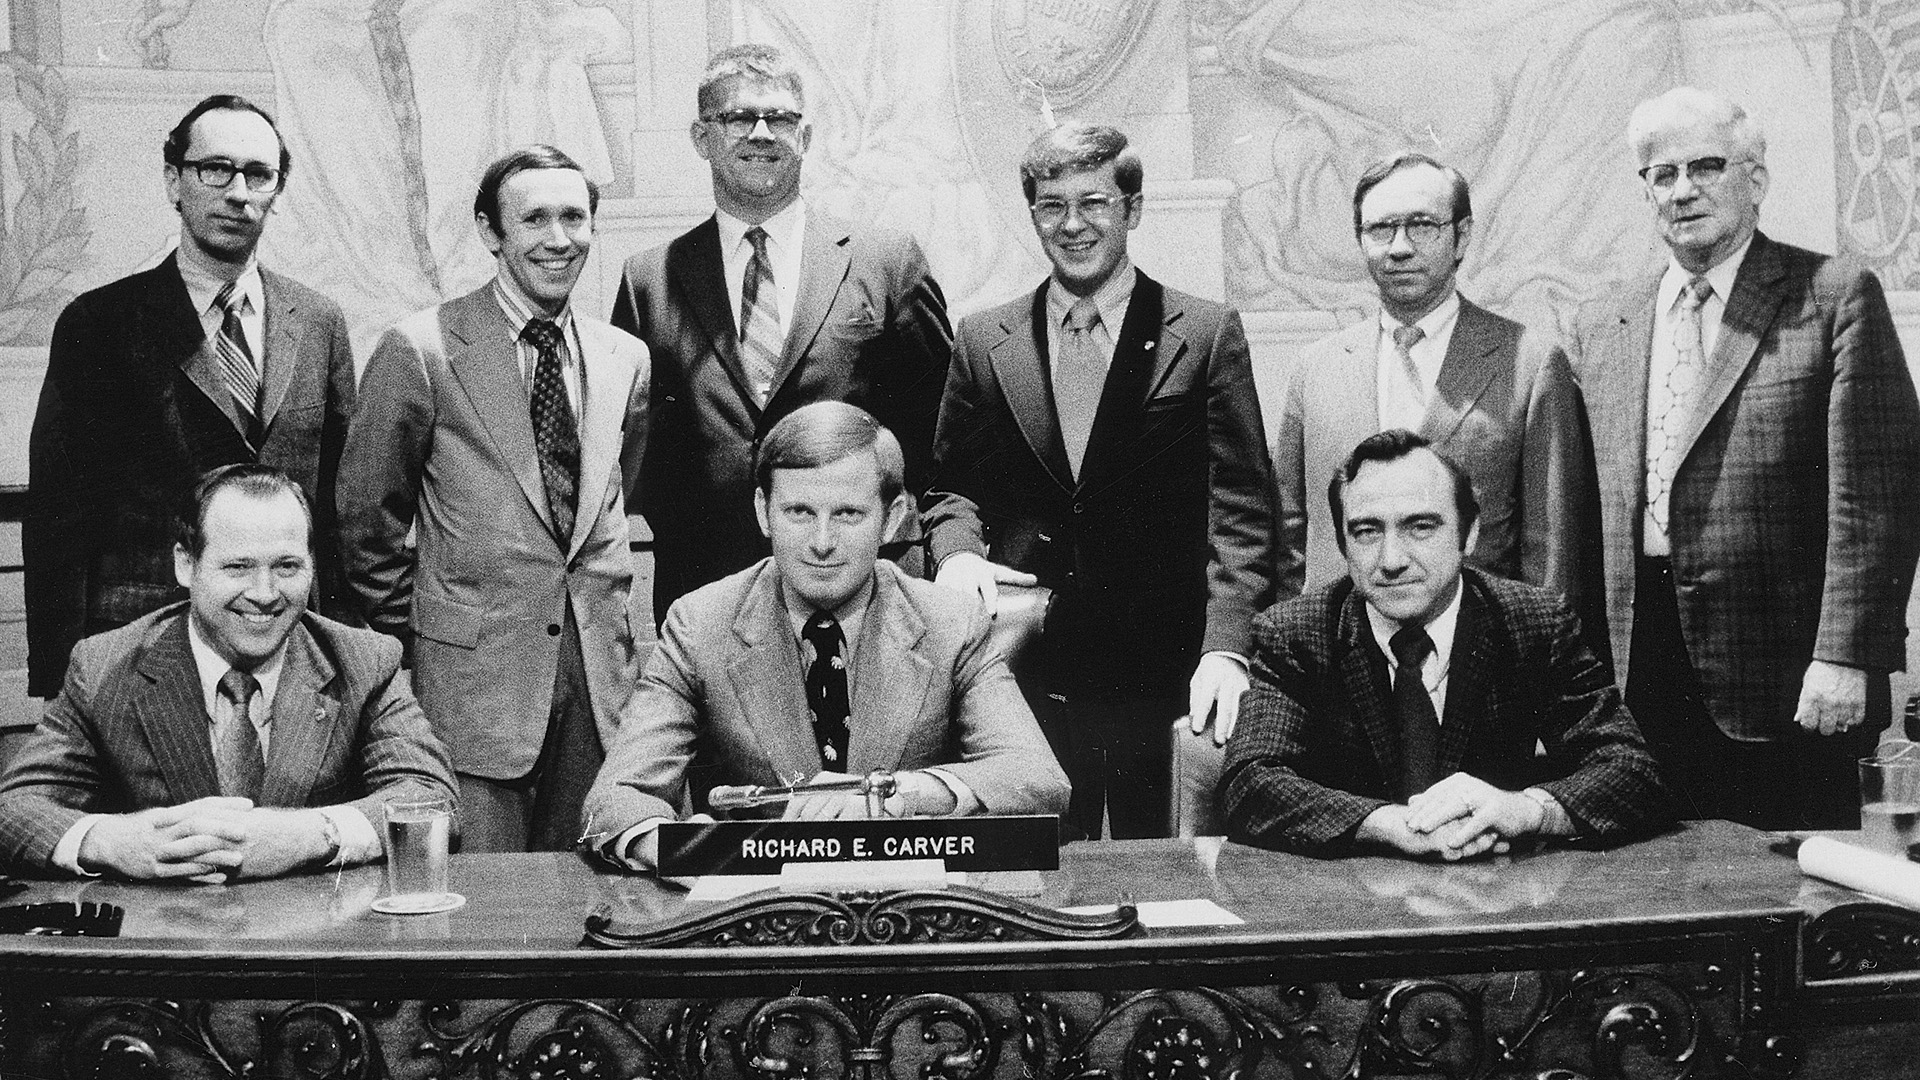 Peoria's 1973 City Council. Standing, left to right, are Jim Bateman, Frank Renner, Dick Neumiller, Bruce Brown, Warren Reynolds and Tom Dunne. Seated are Les Bergsten, Dick Carver and Joe Mudd